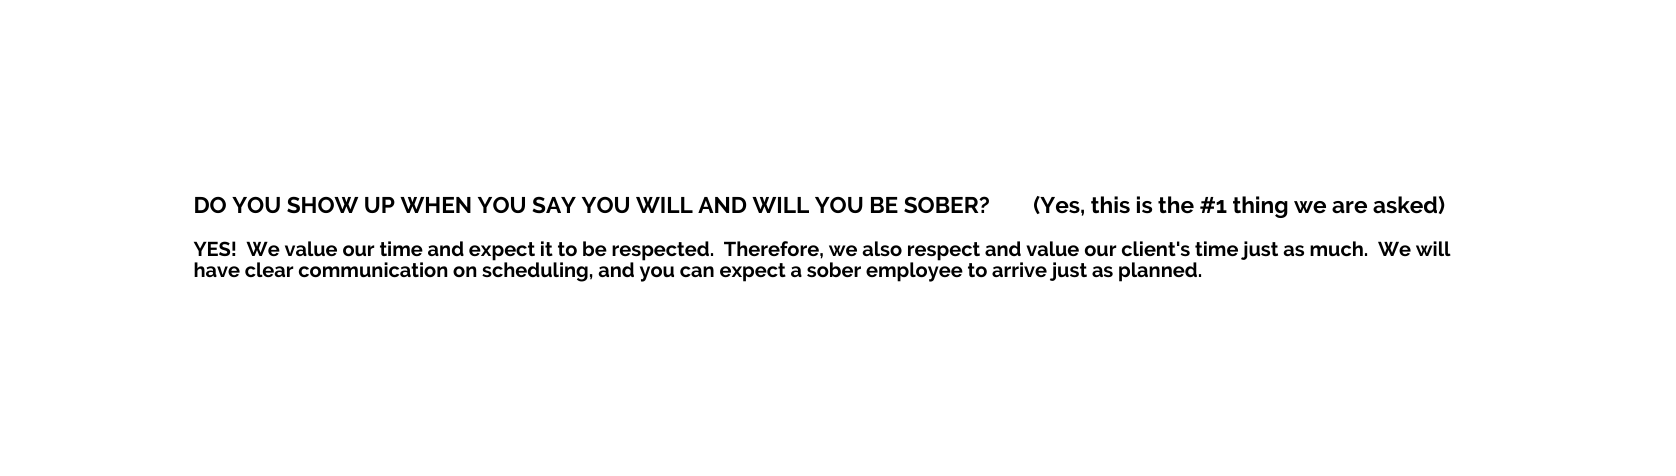 DO YOU SHOW UP WHEN YOU SAY YOU WILL AND WILL YOU BE SOBER Yes this is the 1 thing we are asked YES We value our time and expect it to be respected Therefore we also respect and value our client s time just as much We will have clear communication on scheduling and you can expect a sober employee to arrive just as planned